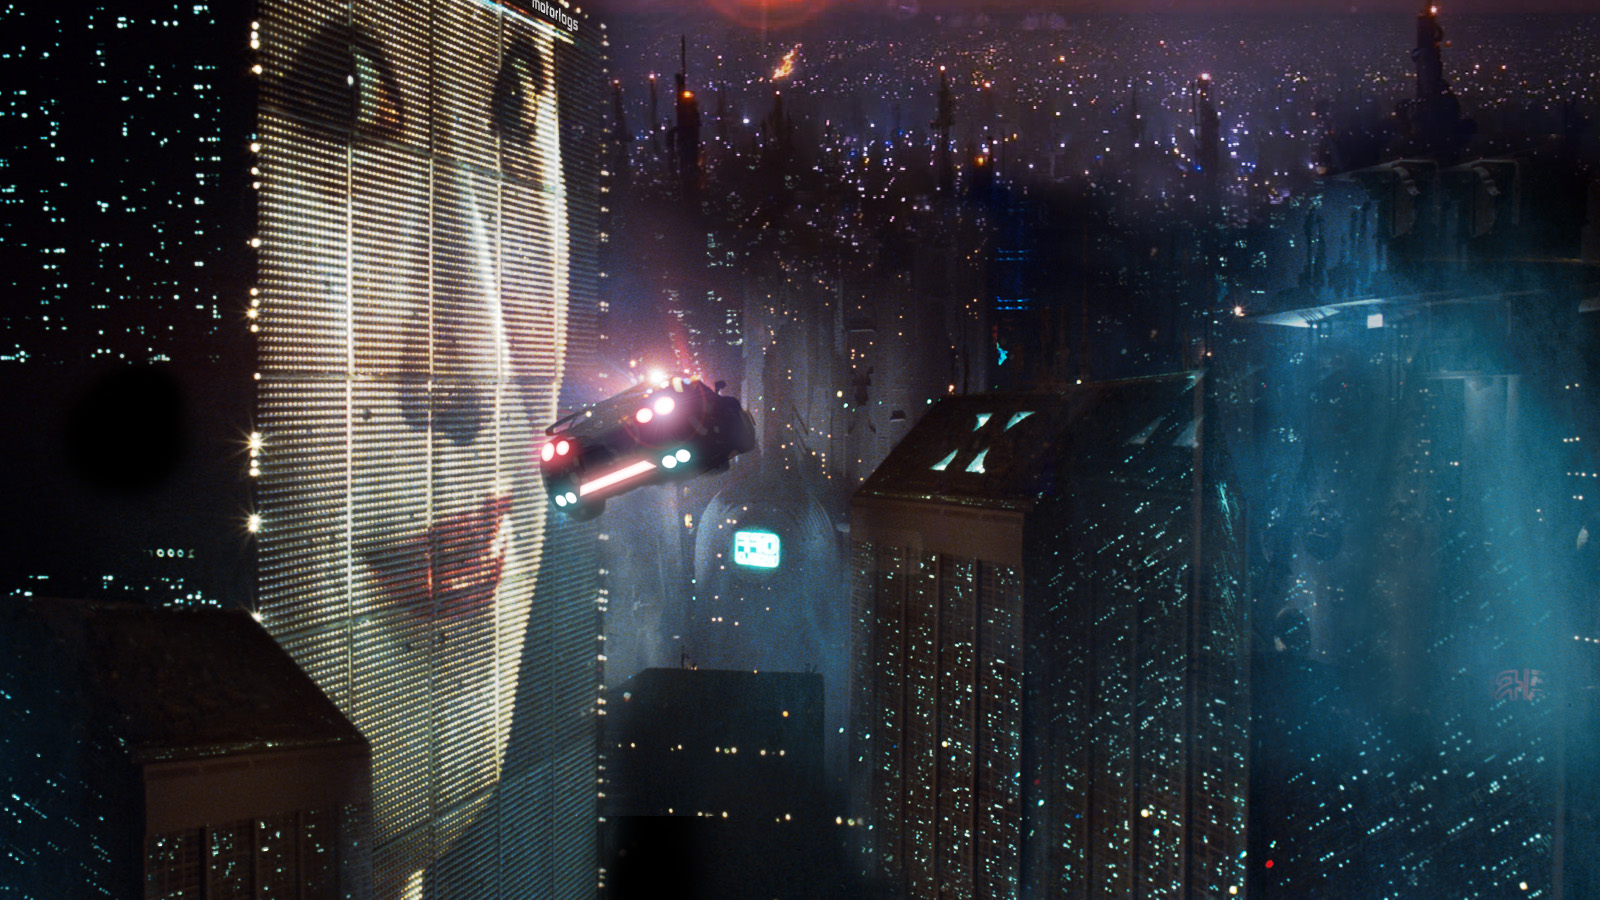 How Will Blade Runner 2 Connect To The Original?